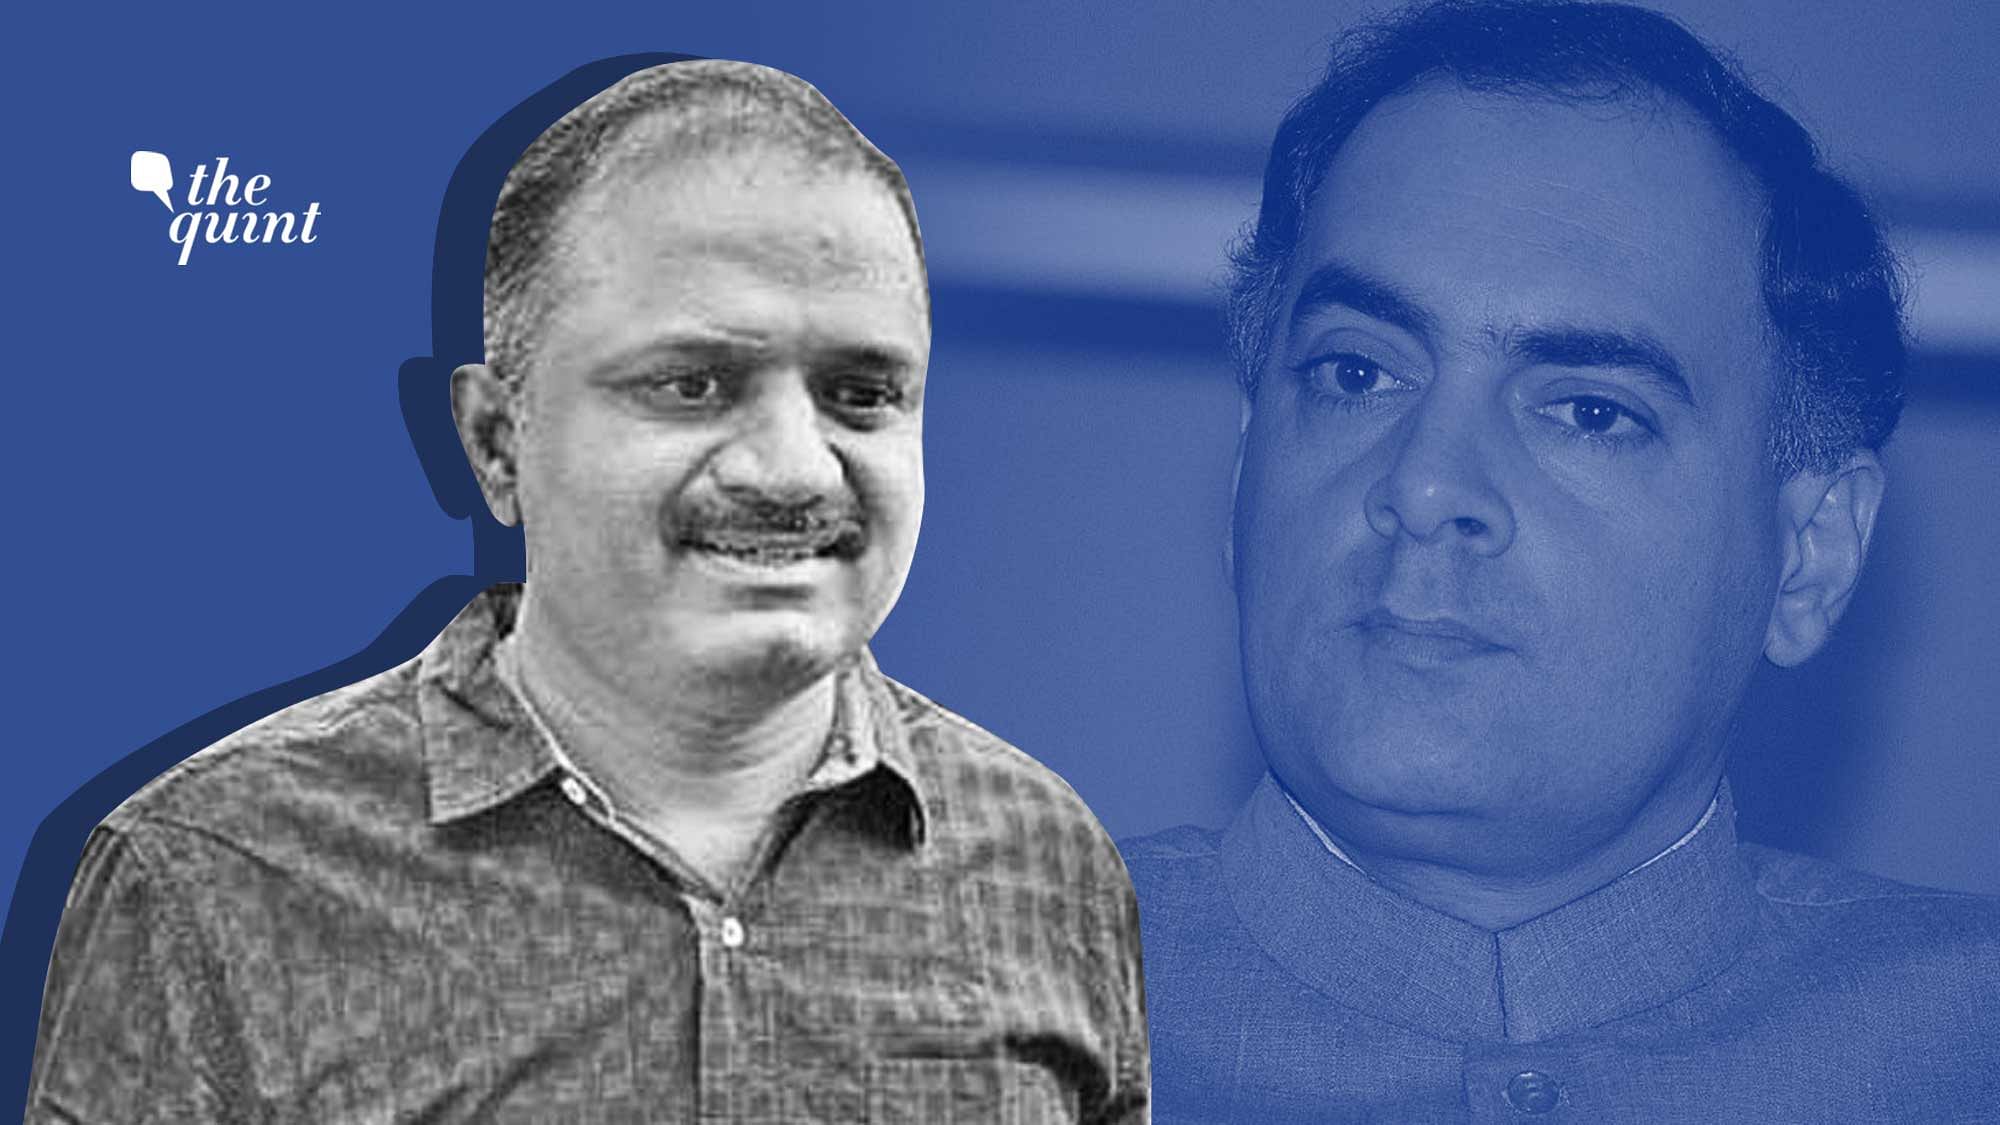 <div class="paragraphs"><p>On 18 May 2021, amid a legal dispute over who the appropriate authority to decide the remission plea is, the Supreme Court ordered&nbsp;Rajiv Gandhi Assassination convict Perarivalan’s release.</p></div>